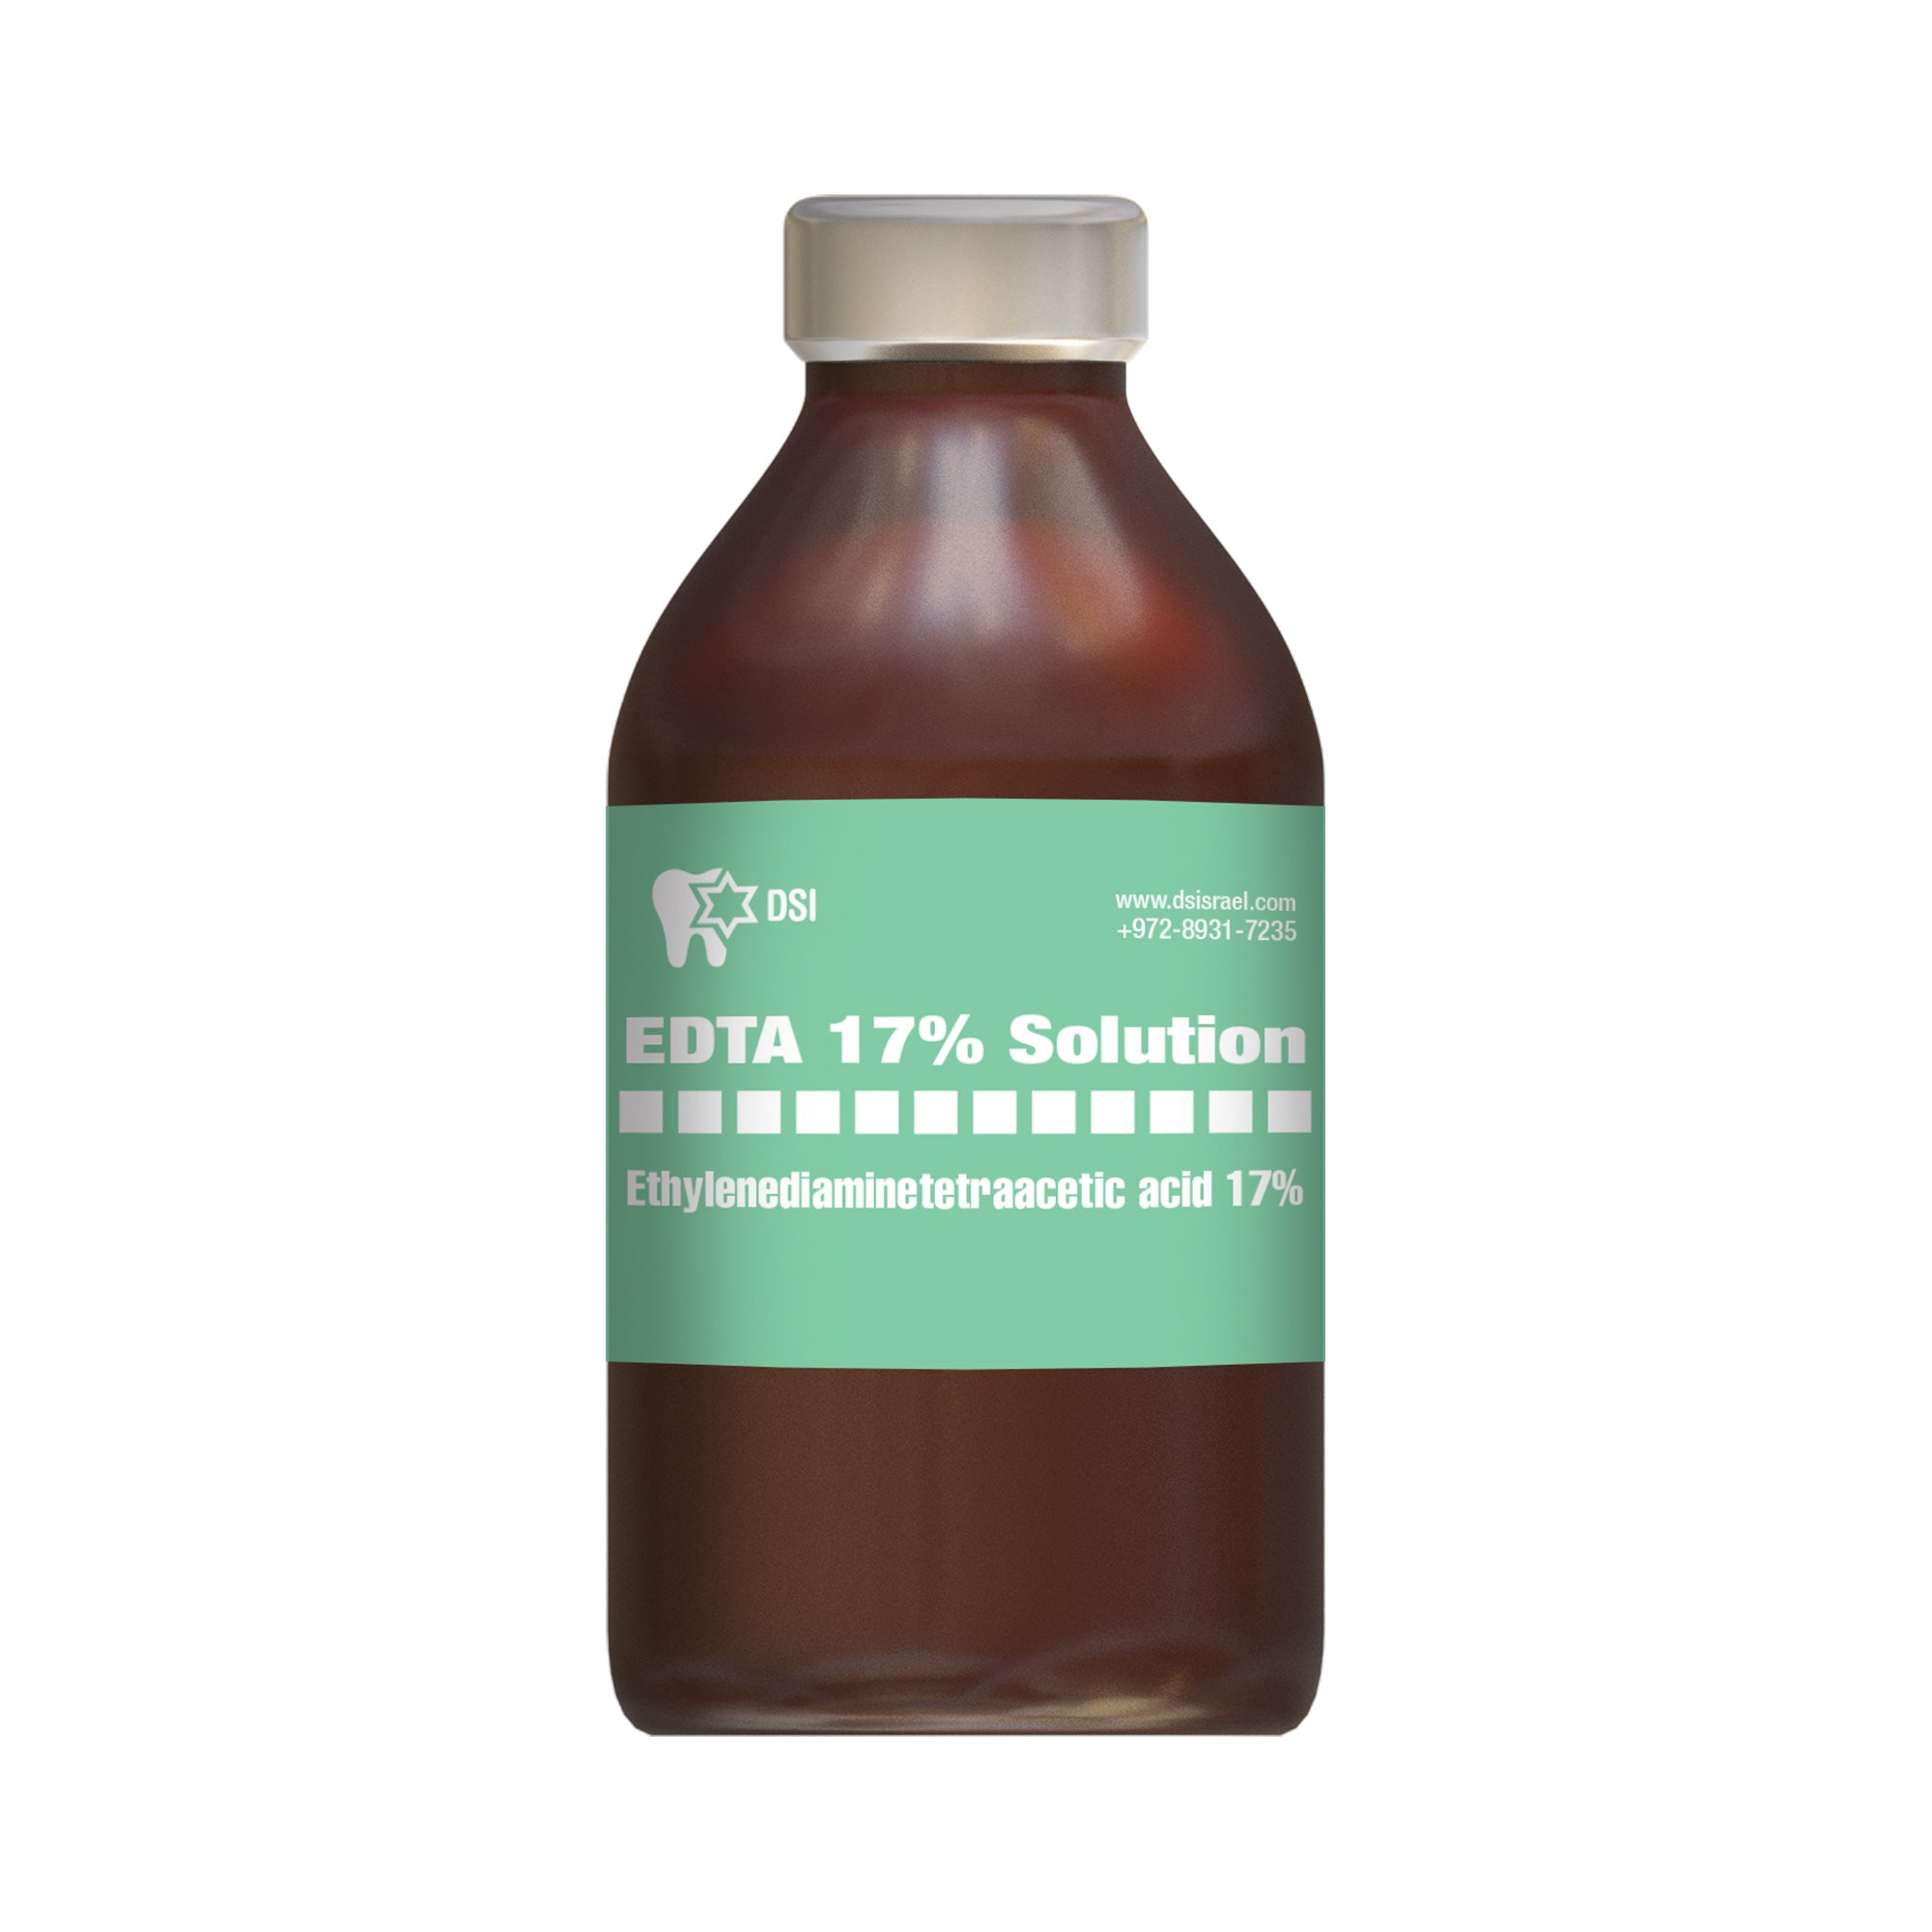 DSI EDTA 17% Solution Chelating & Decalcification Liquid For Root Canals